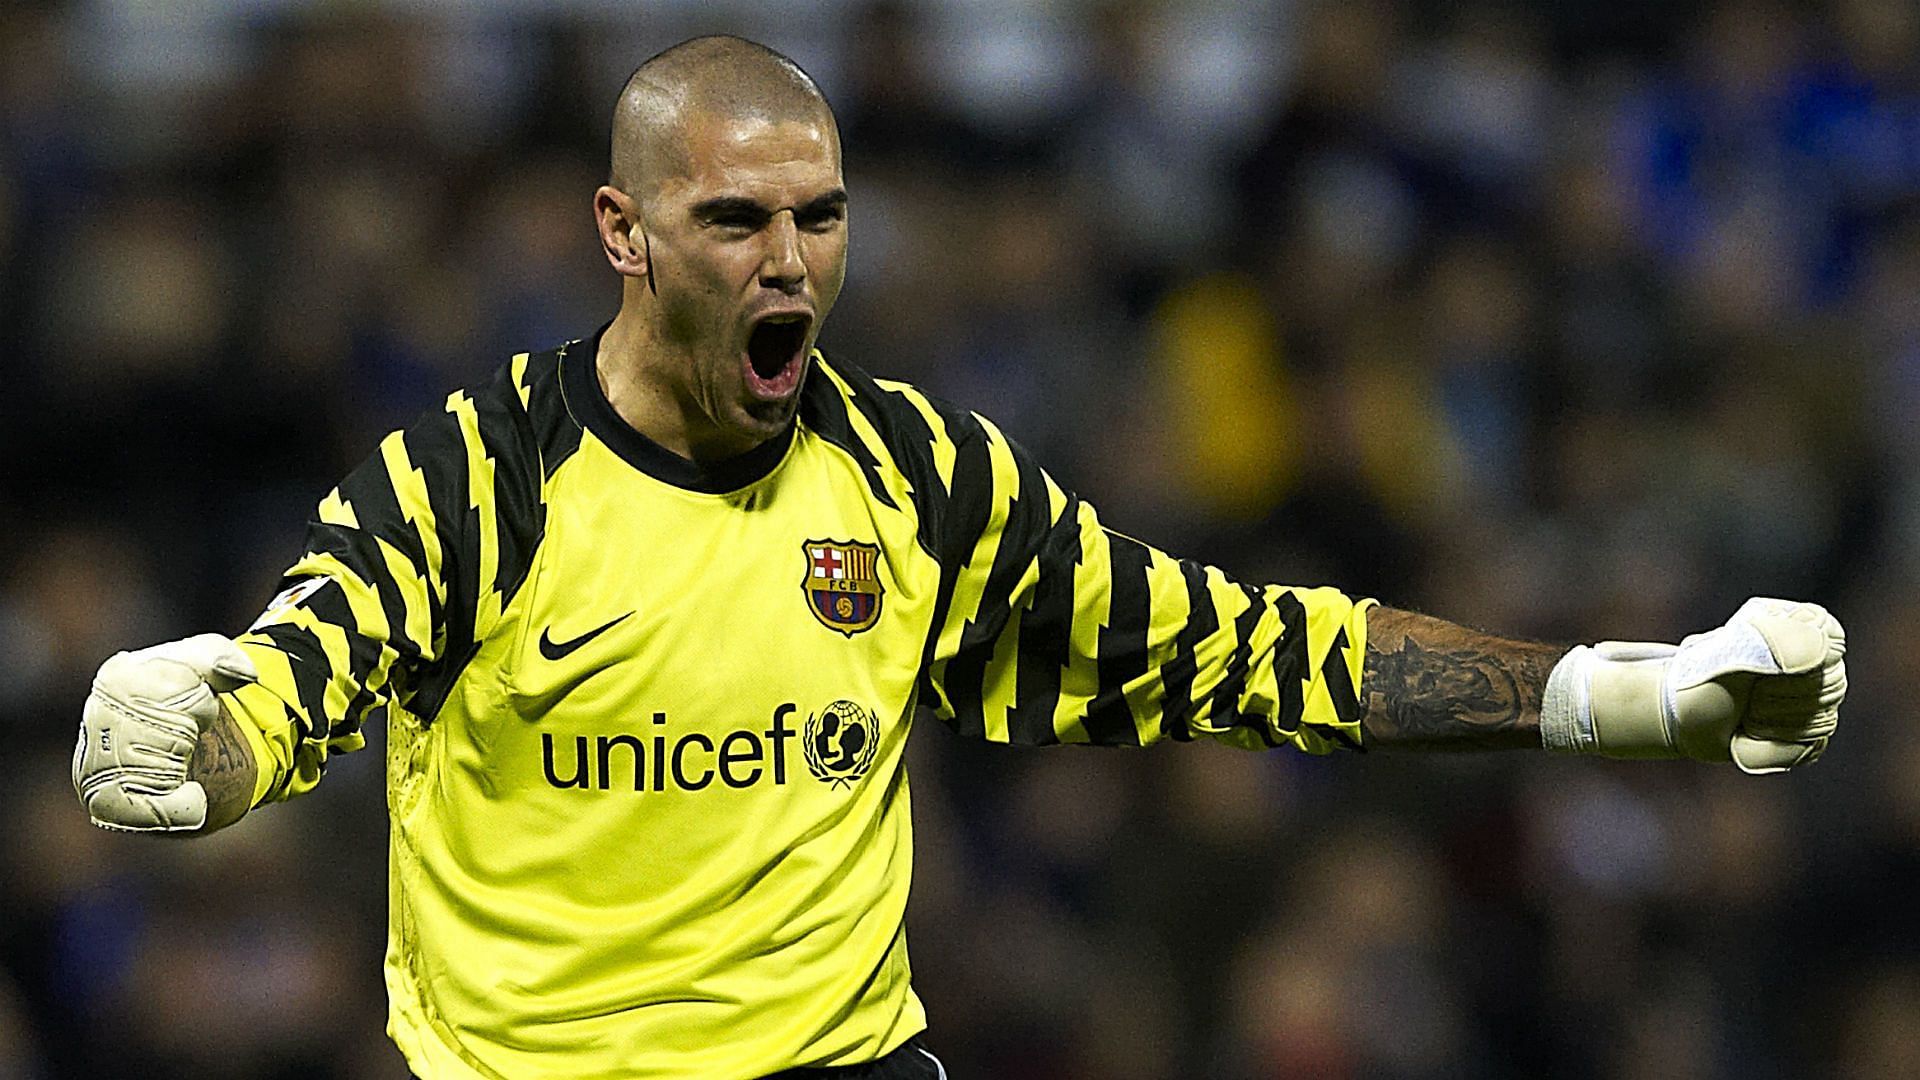 Victor Valdes passionately celebrating a goal scored by his team